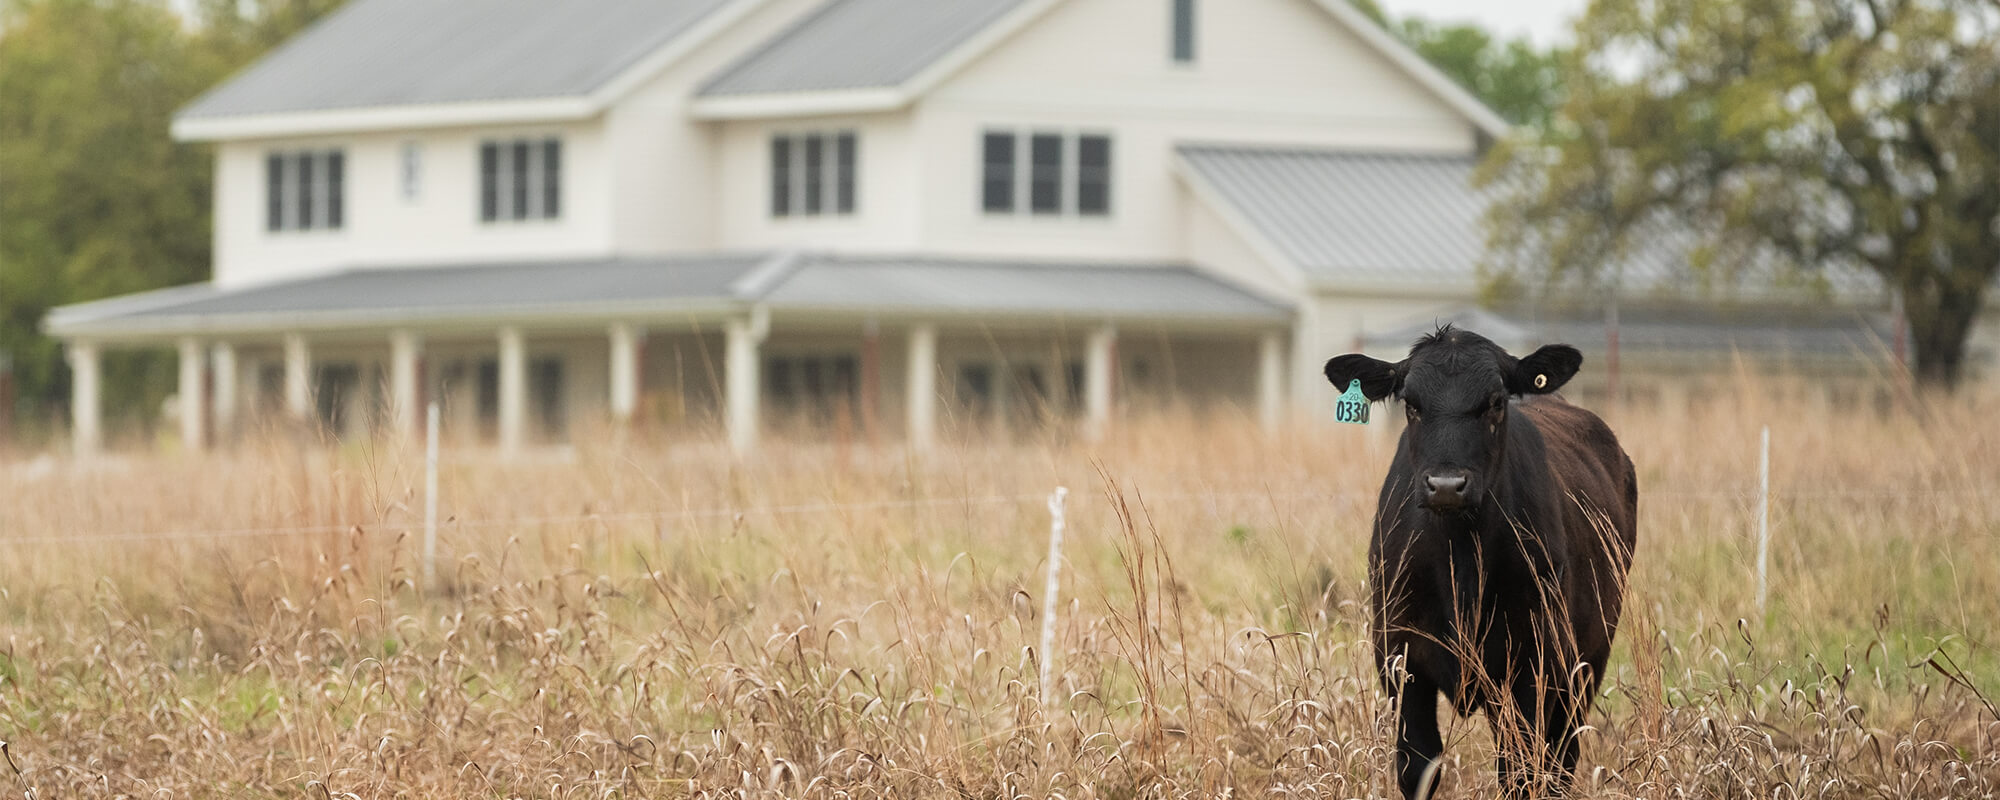 Cow standing in tall pasture with dormant forage in front of a farmhouse.